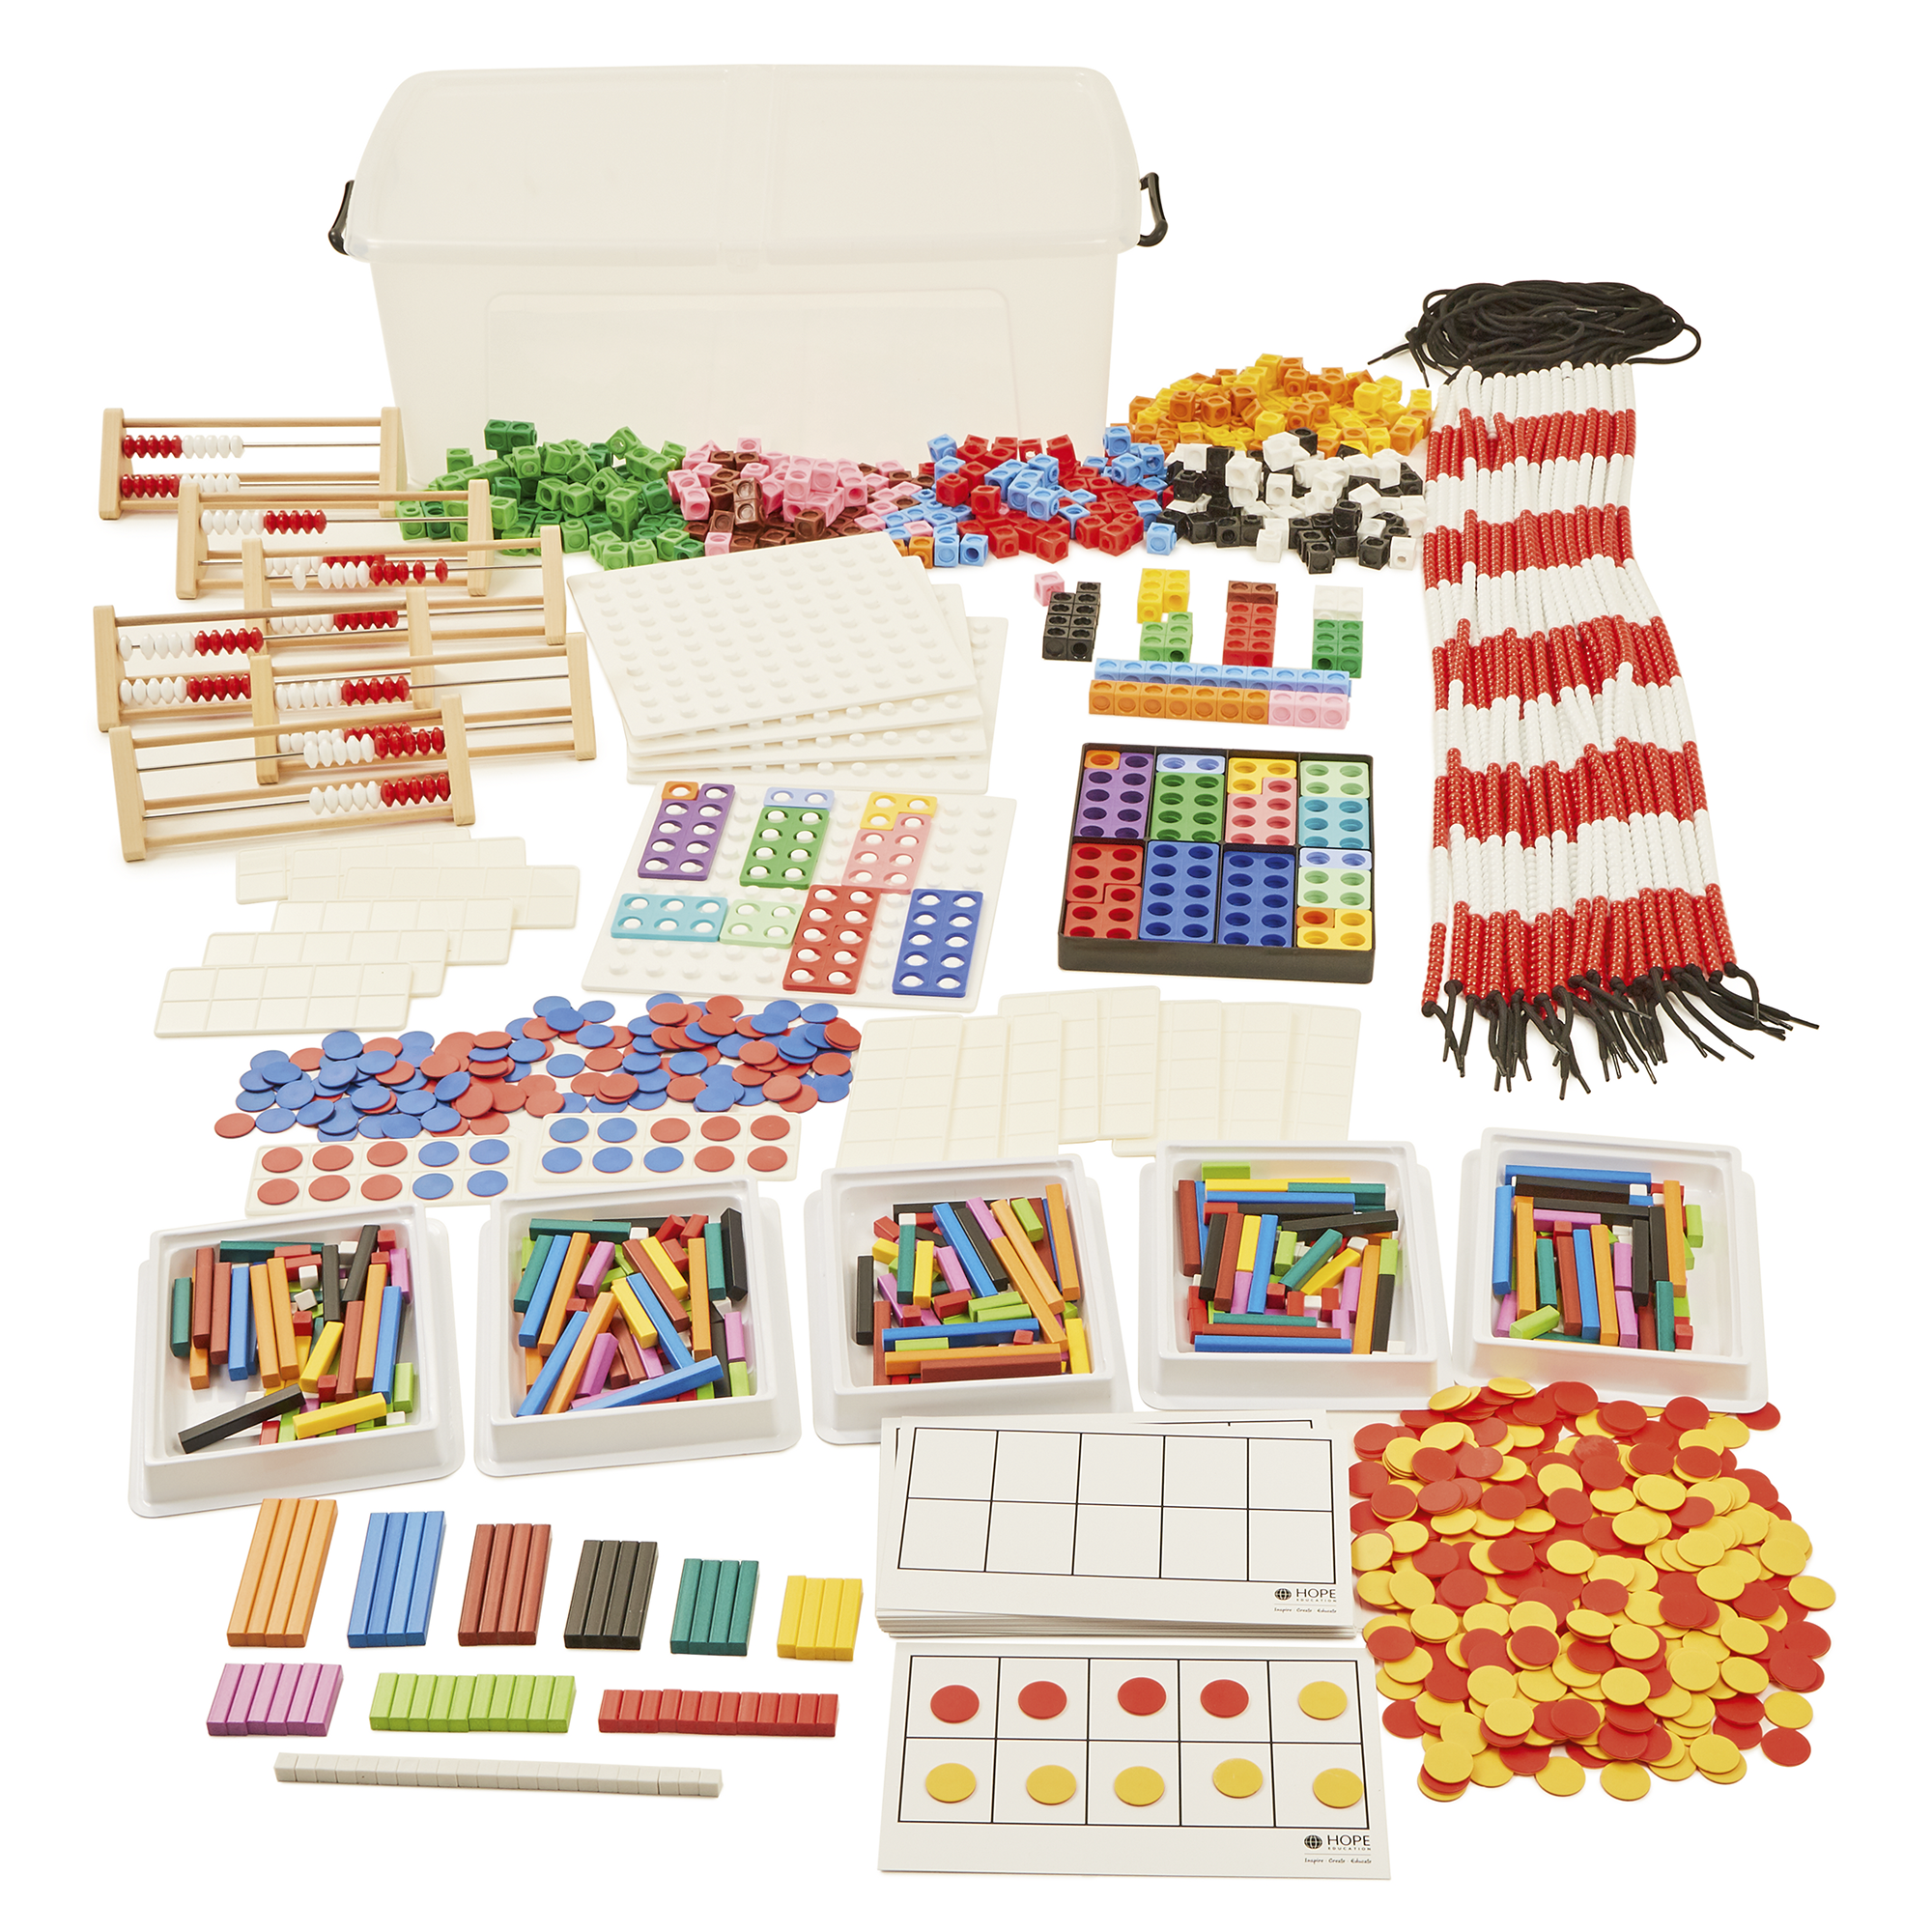 he1825218-maths-mastery-number-kit-from-hope-education-findel-education